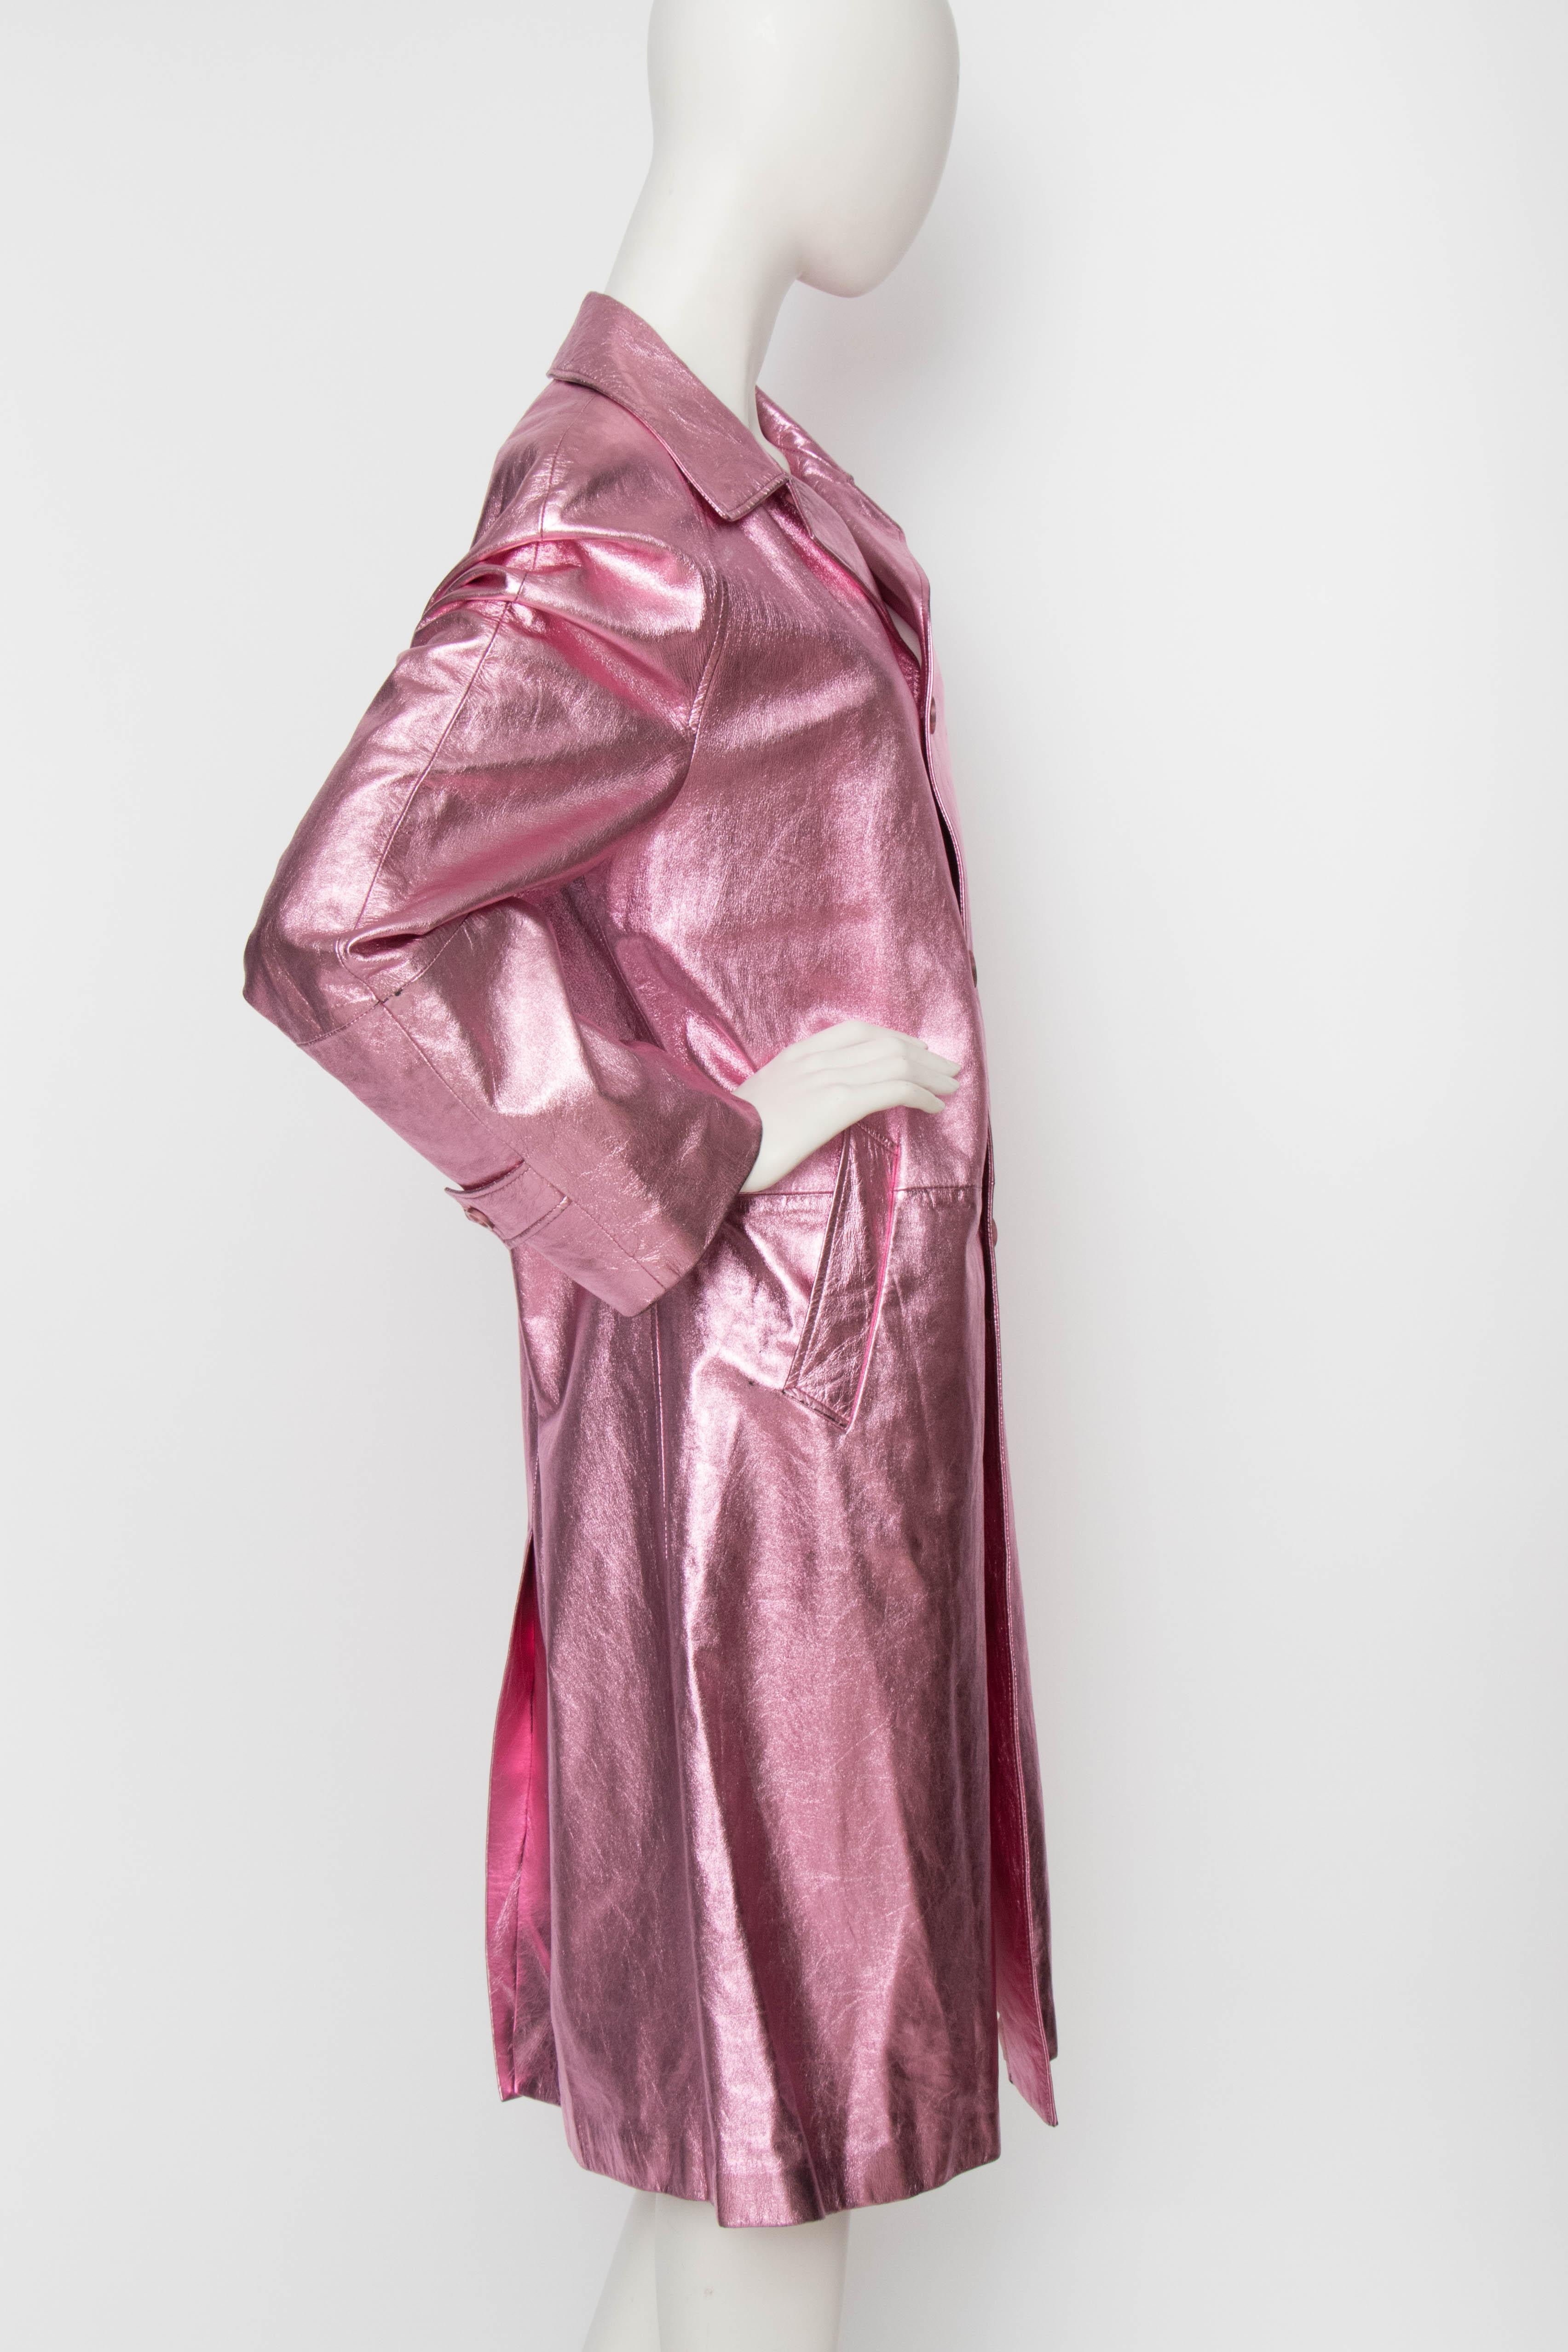 A fabulous 1990s long pink metallic Gianni Versace leather jacket with front button closure. raglan sleeves and side welt pockets. The extravagant jacket is fully lined in a pink polyester ling with jacquard-woven Medusa faces. 

The size of the